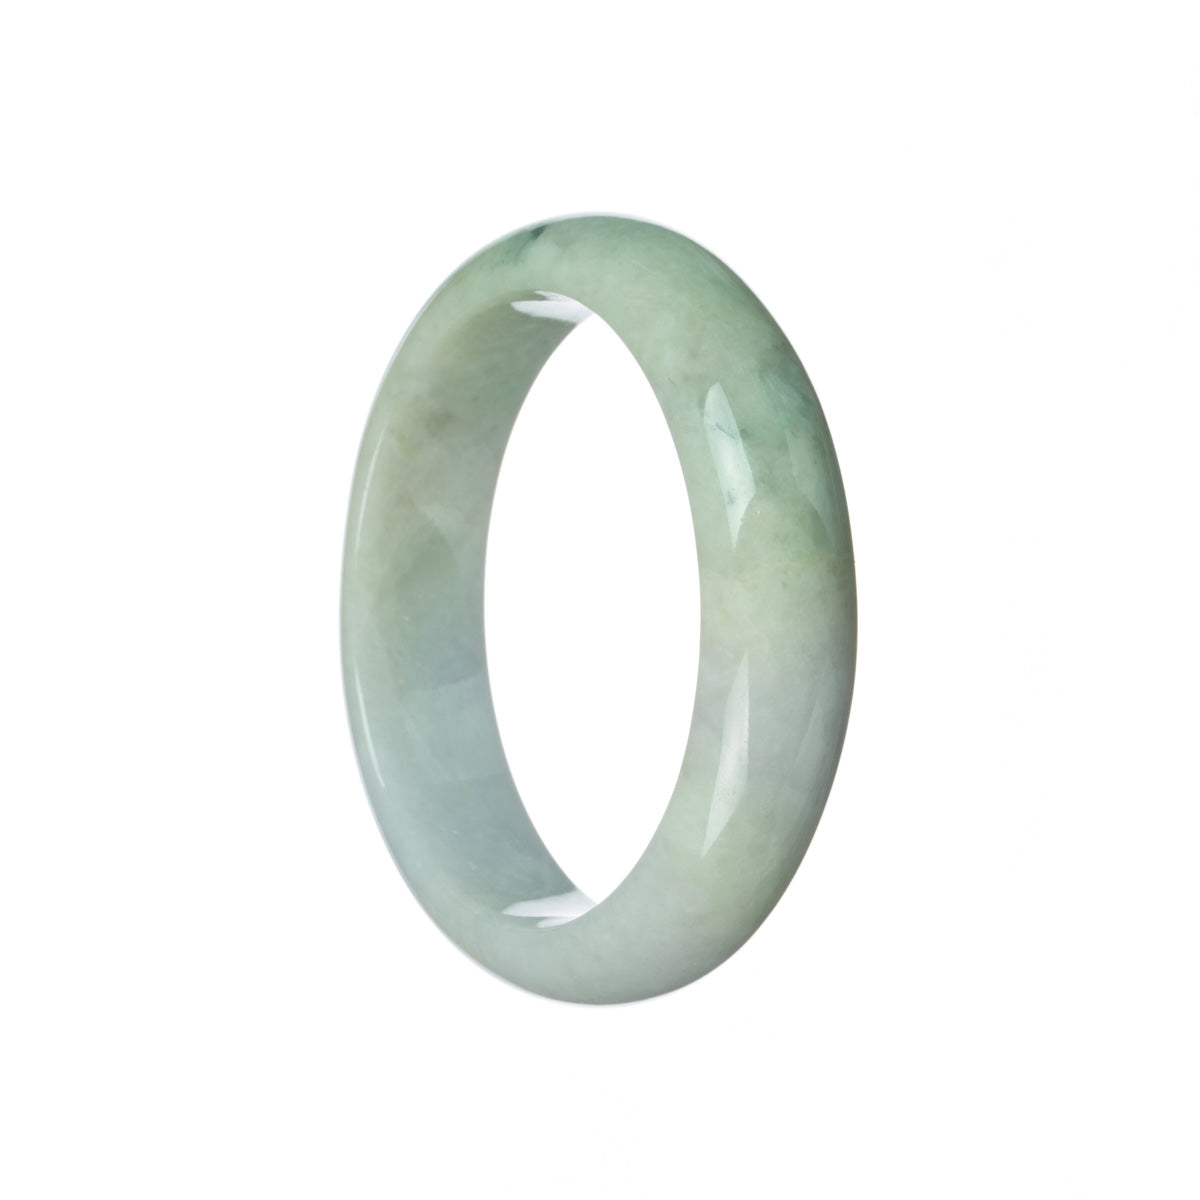 A beautiful pale green and lavender jadeite bangle bracelet, featuring a half moon shape.